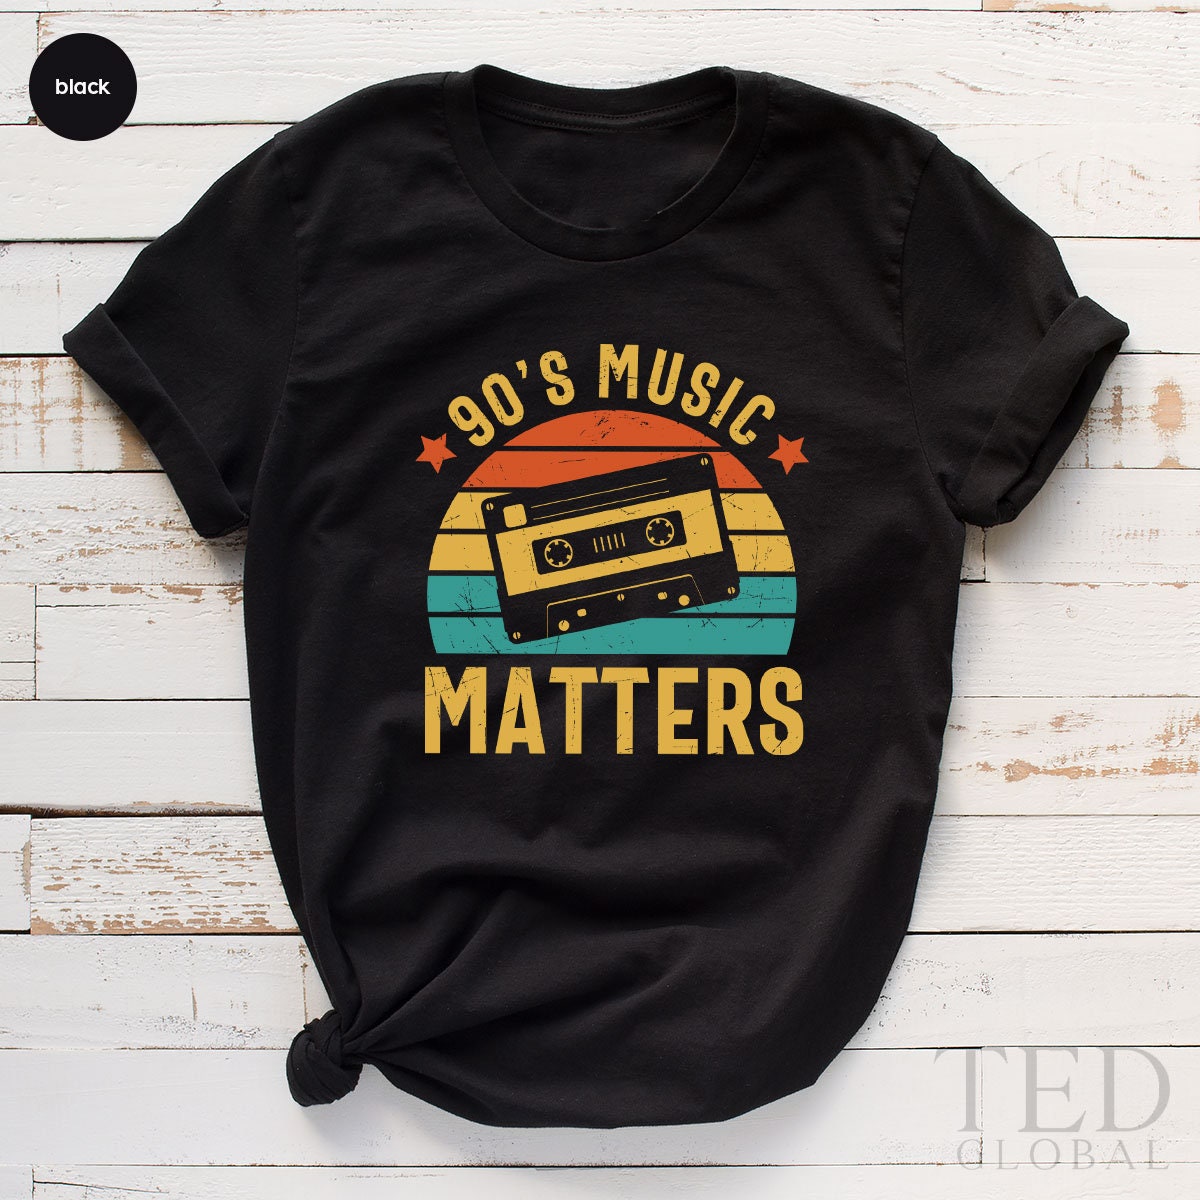 Cute 90's Music Matters T-Shirt, Vintage 90's Music T Shirt, Funny 90's Music Shirt, Historical Shirts, Tape Shirt, Gift For 90's Birthday - Fastdeliverytees.com